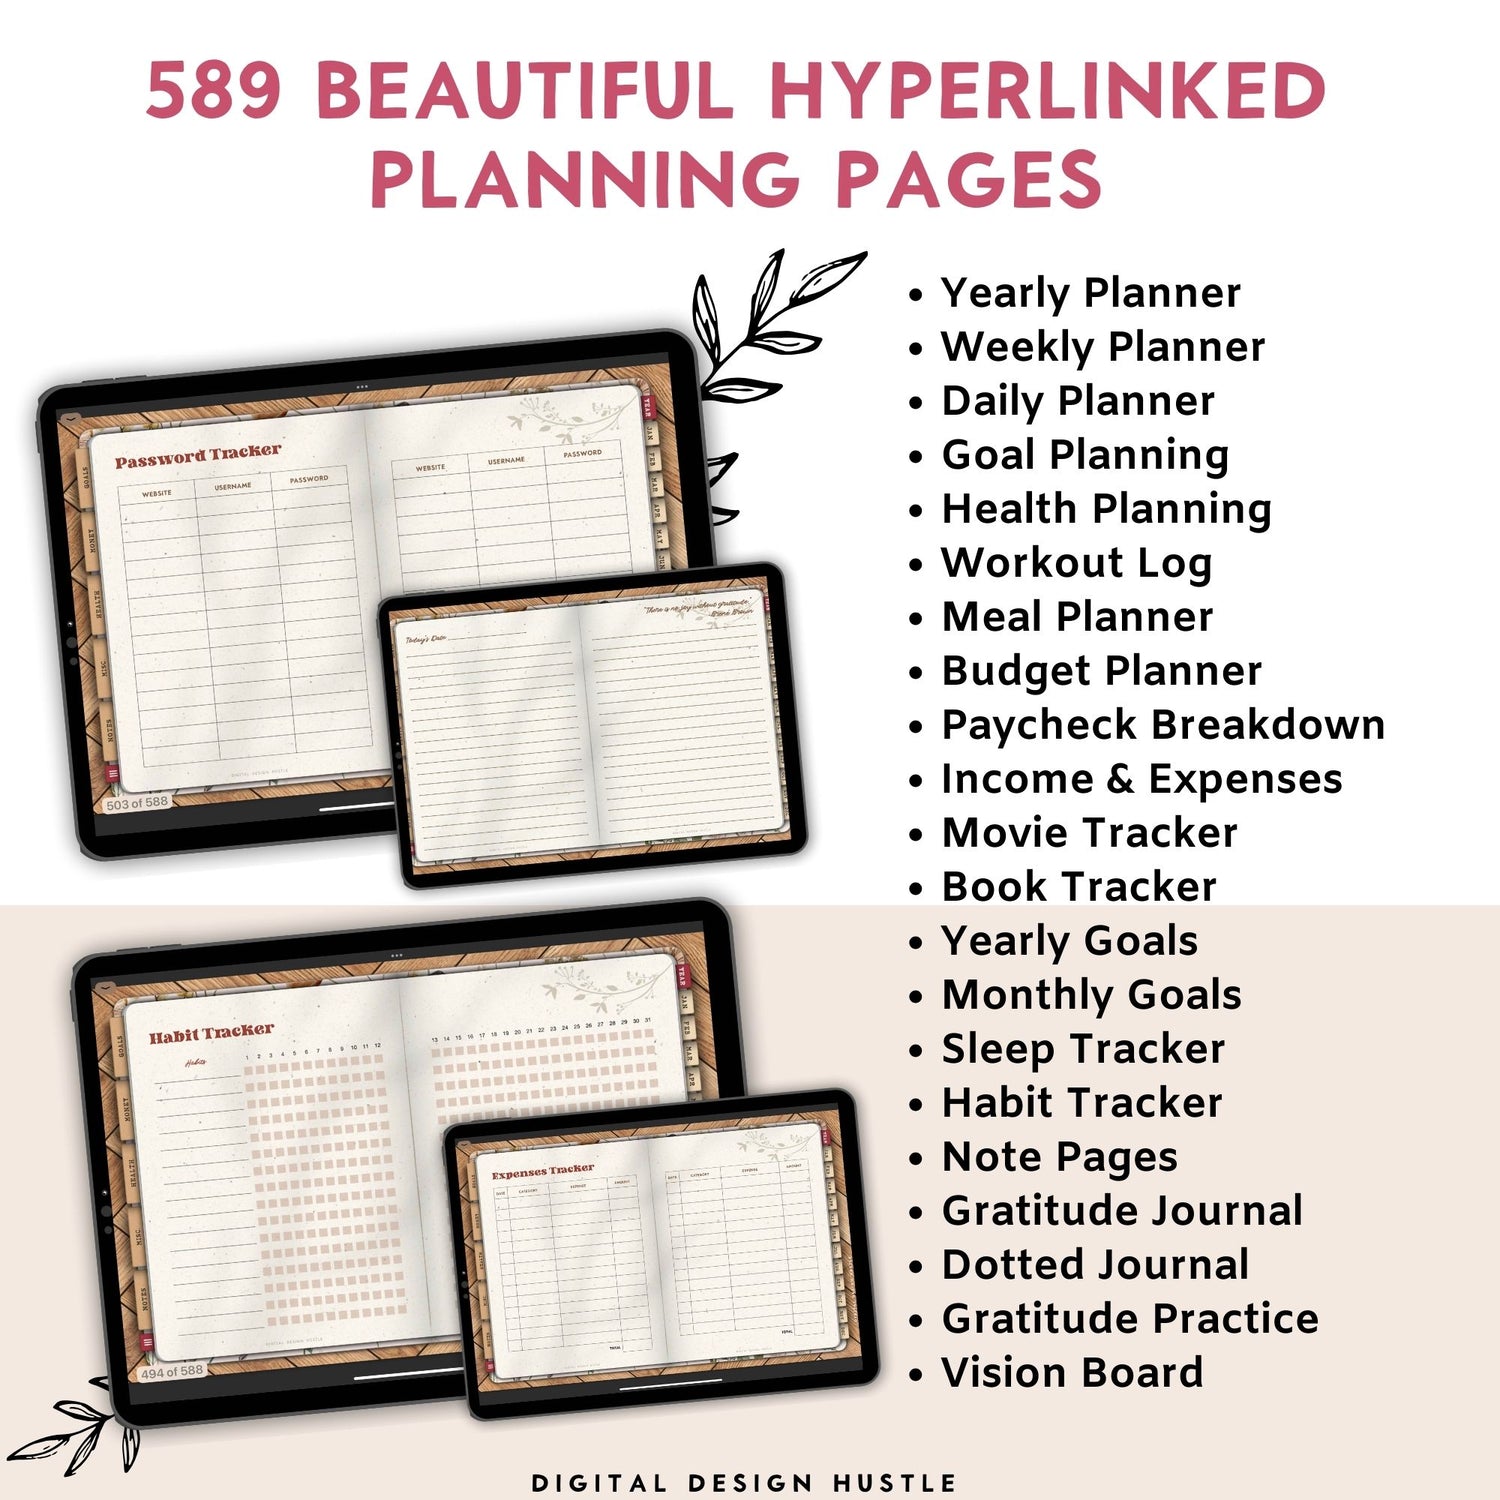 Embrace the coming year with our meticulously crafted 2024 Ultimate Fab Life Digital Planner. This comprehensive 589-page planner is your indispensable companion for the year ahead, featuring a thoughtfully structured hyperlinked 365-day planner complete with yearly, weekly, and daily planning pages.